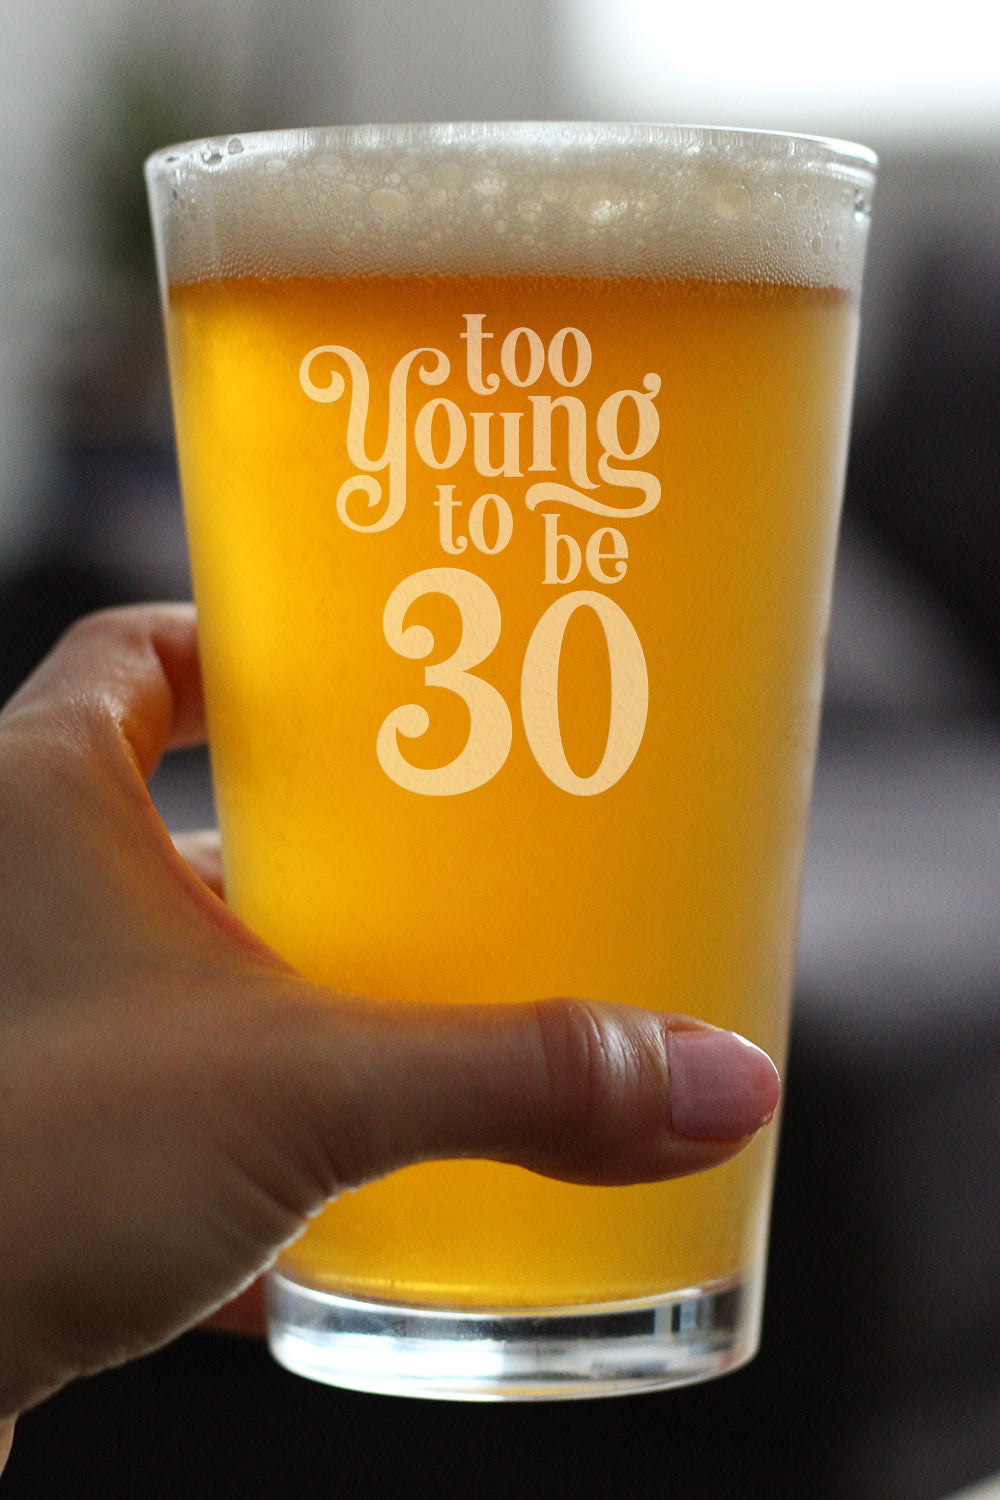 Too Young to Be 30 - Funny 16 oz Pint Glass for Beer - 30th Birthday Gifts for Men or Women Turning 30 - Bday Party Decor